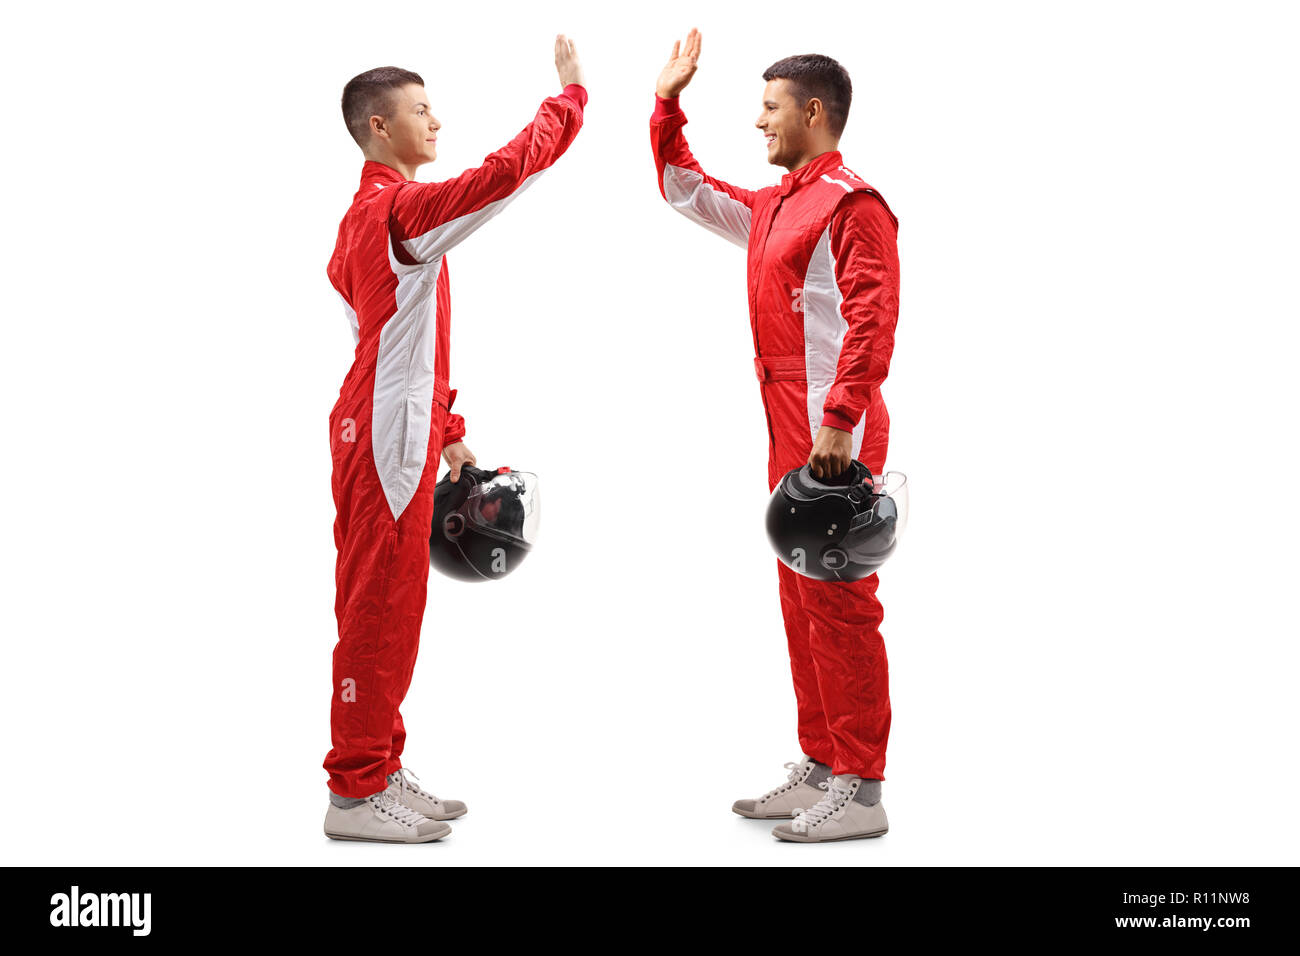 Full length profile shot of two racers high-fiving each other isolated on white background Stock Photo